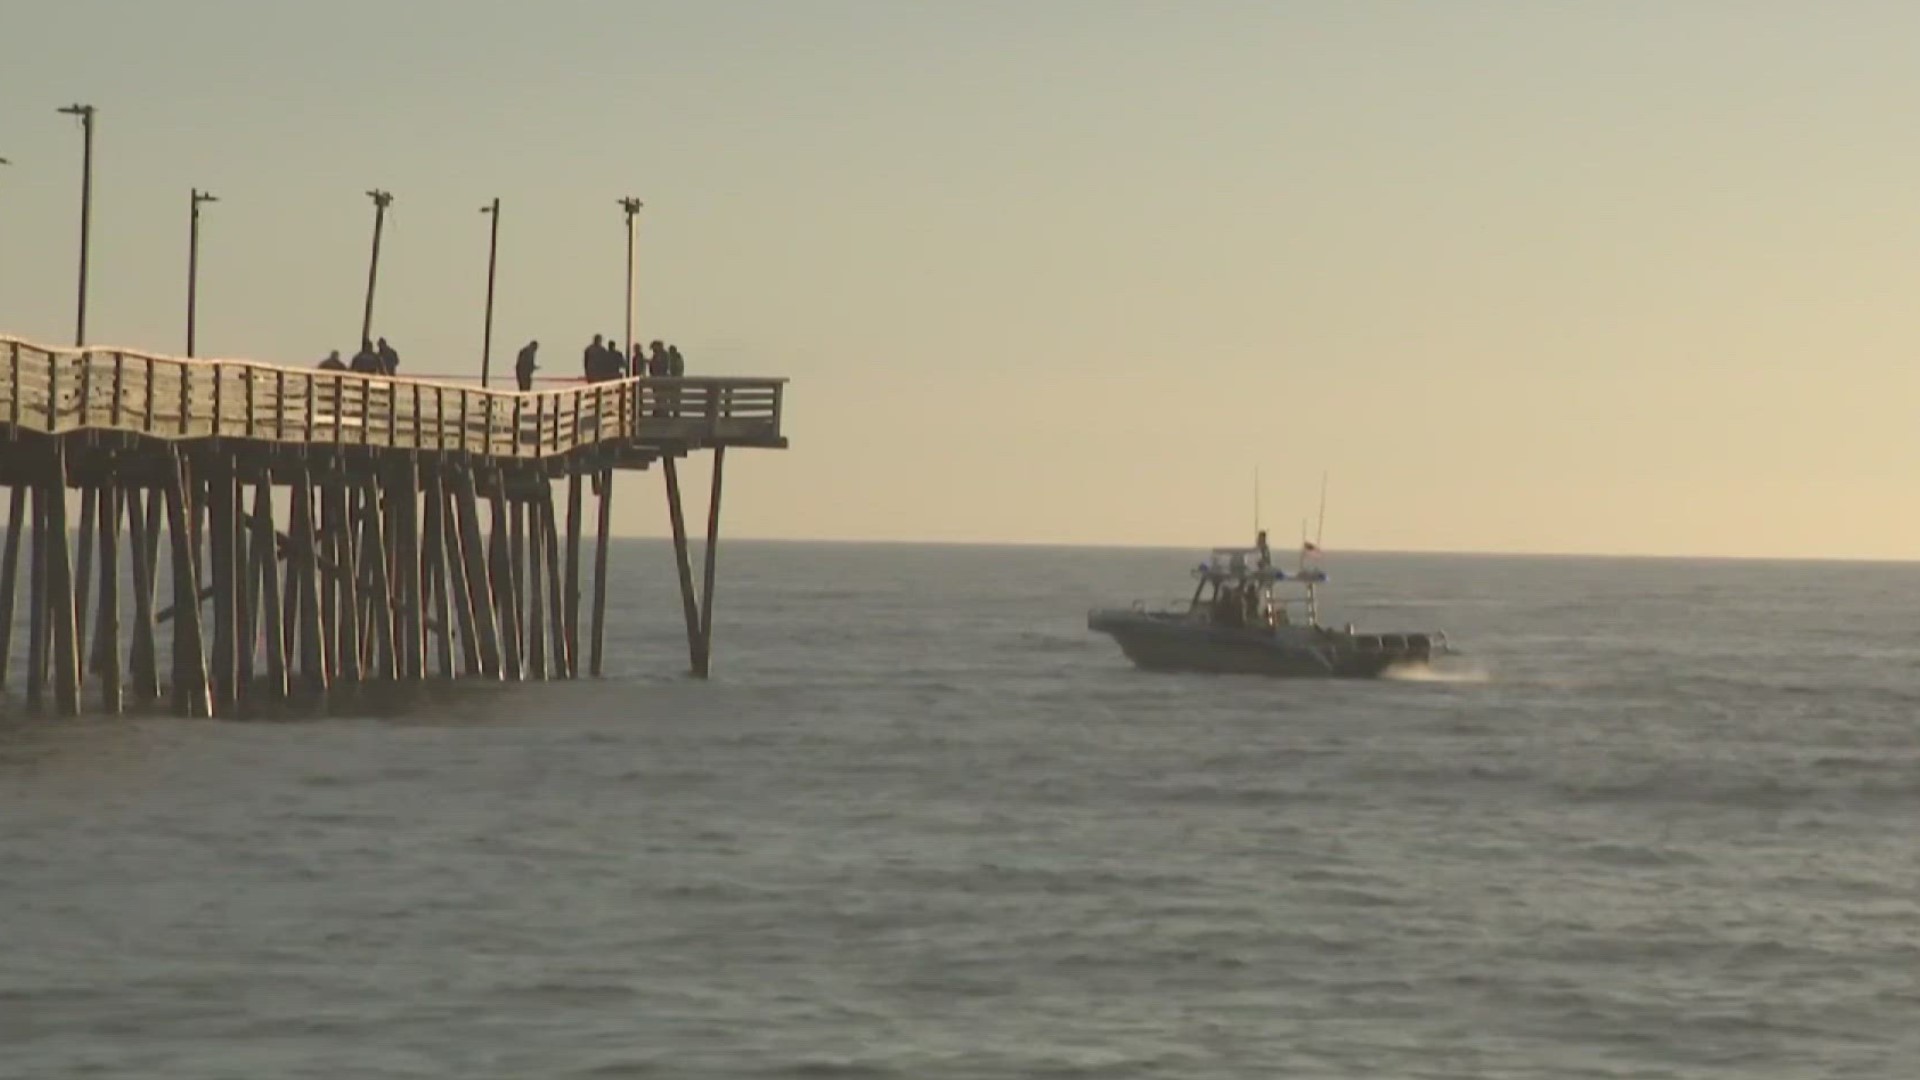 Police blame "adverse water conditions" for the delay in retrieving the vehicle that plunged off the fishing pier.